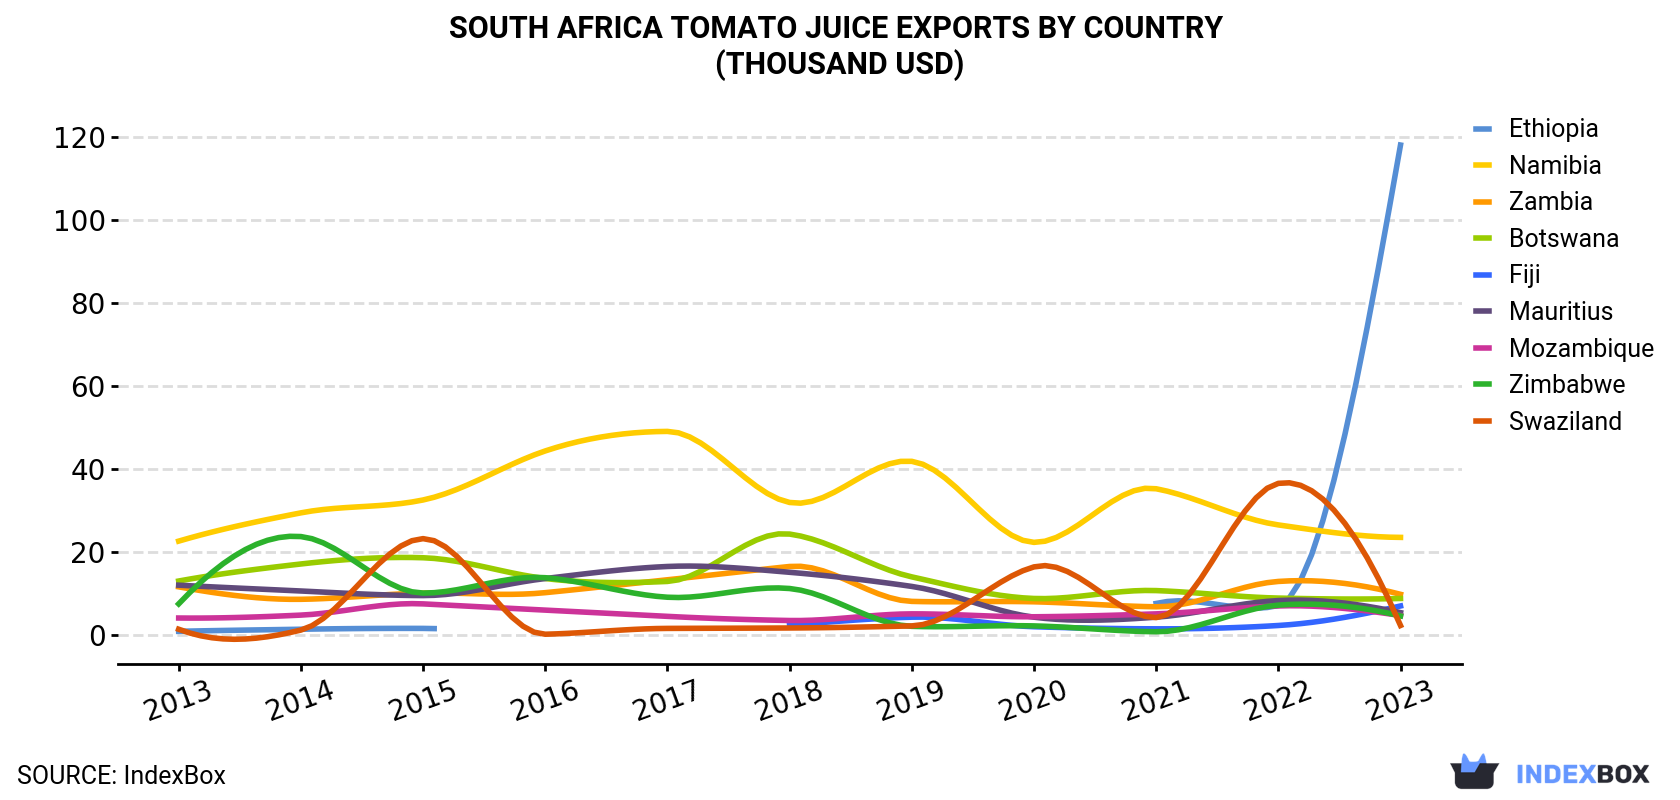 South Africa Tomato Juice Exports By Country (Thousand USD)